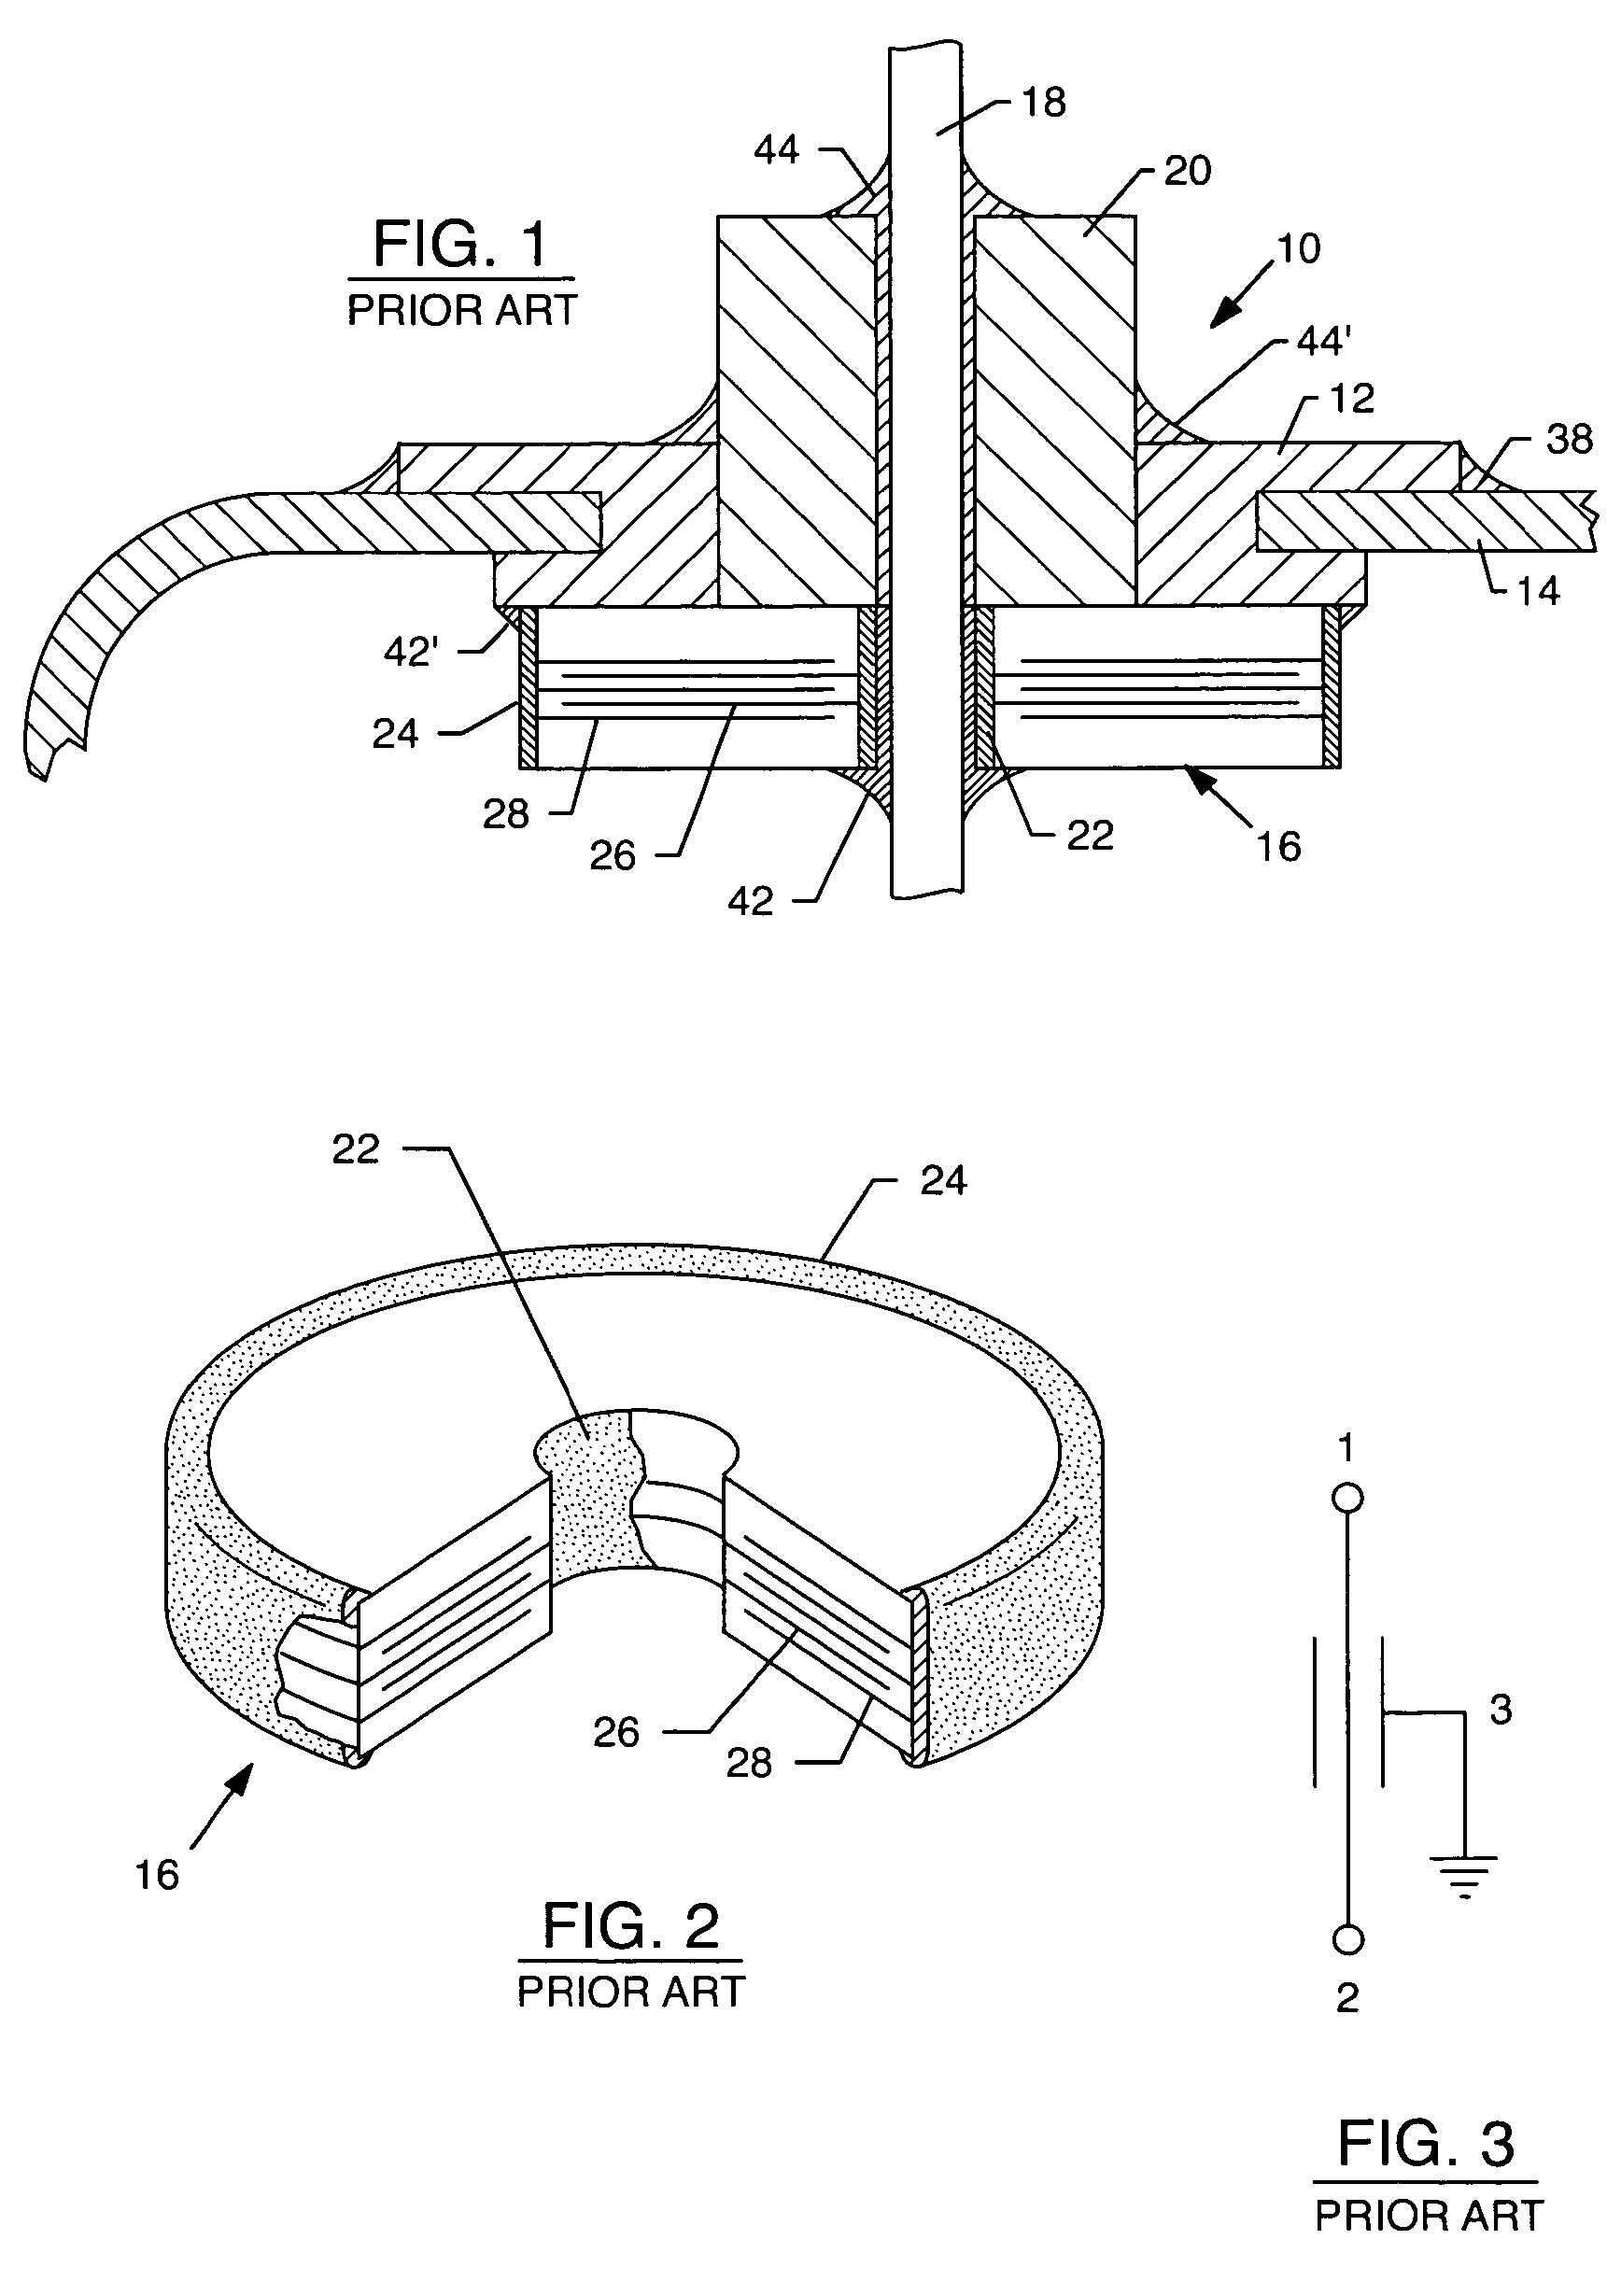 Inductor capacitor EMI filter for human implant applications